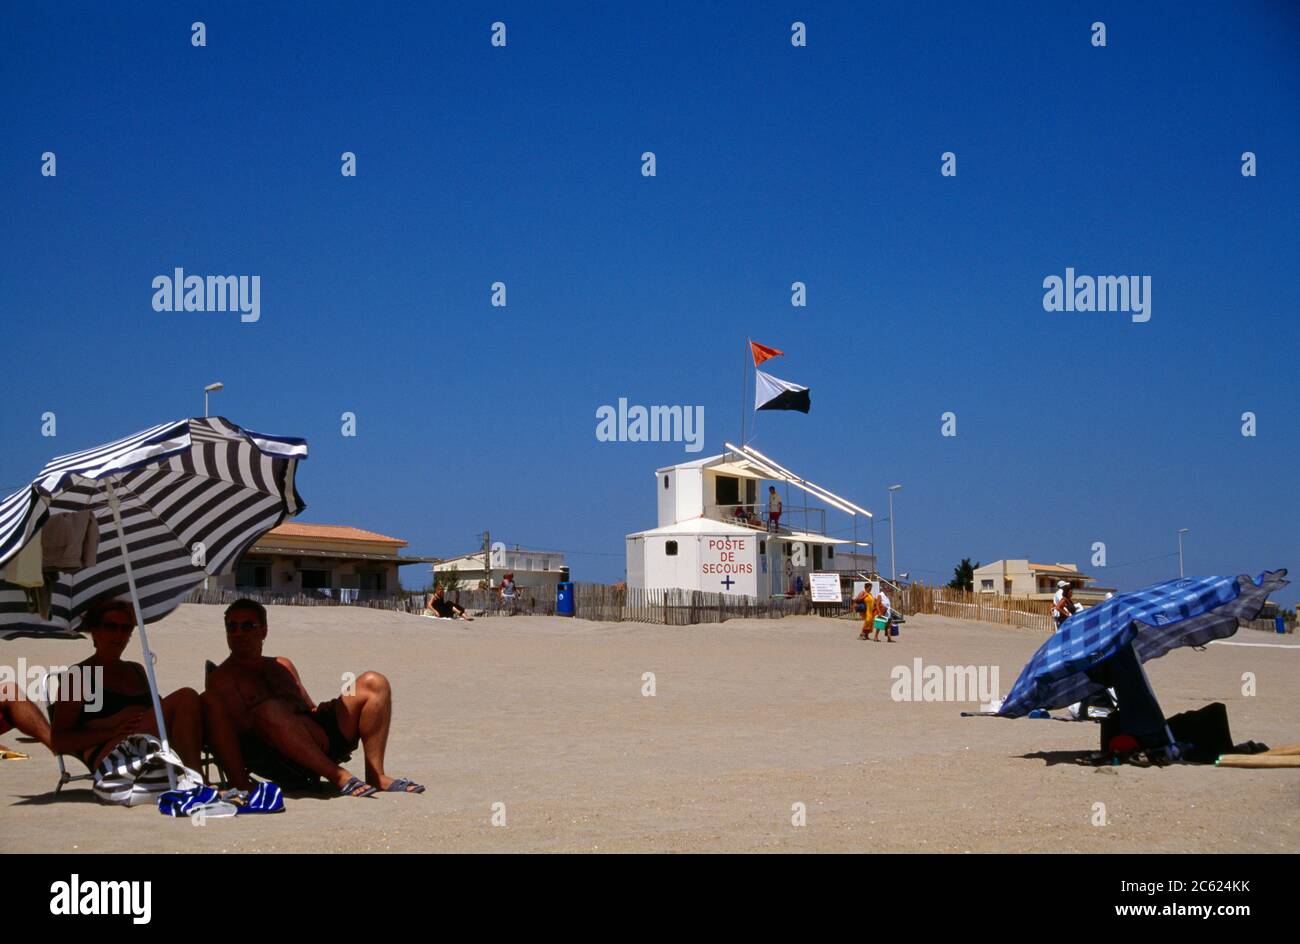 Languedoc Roussillon France Marseillane People Under Parasols On The Beach Poste De Secours (First Aid Post) Stock Photo